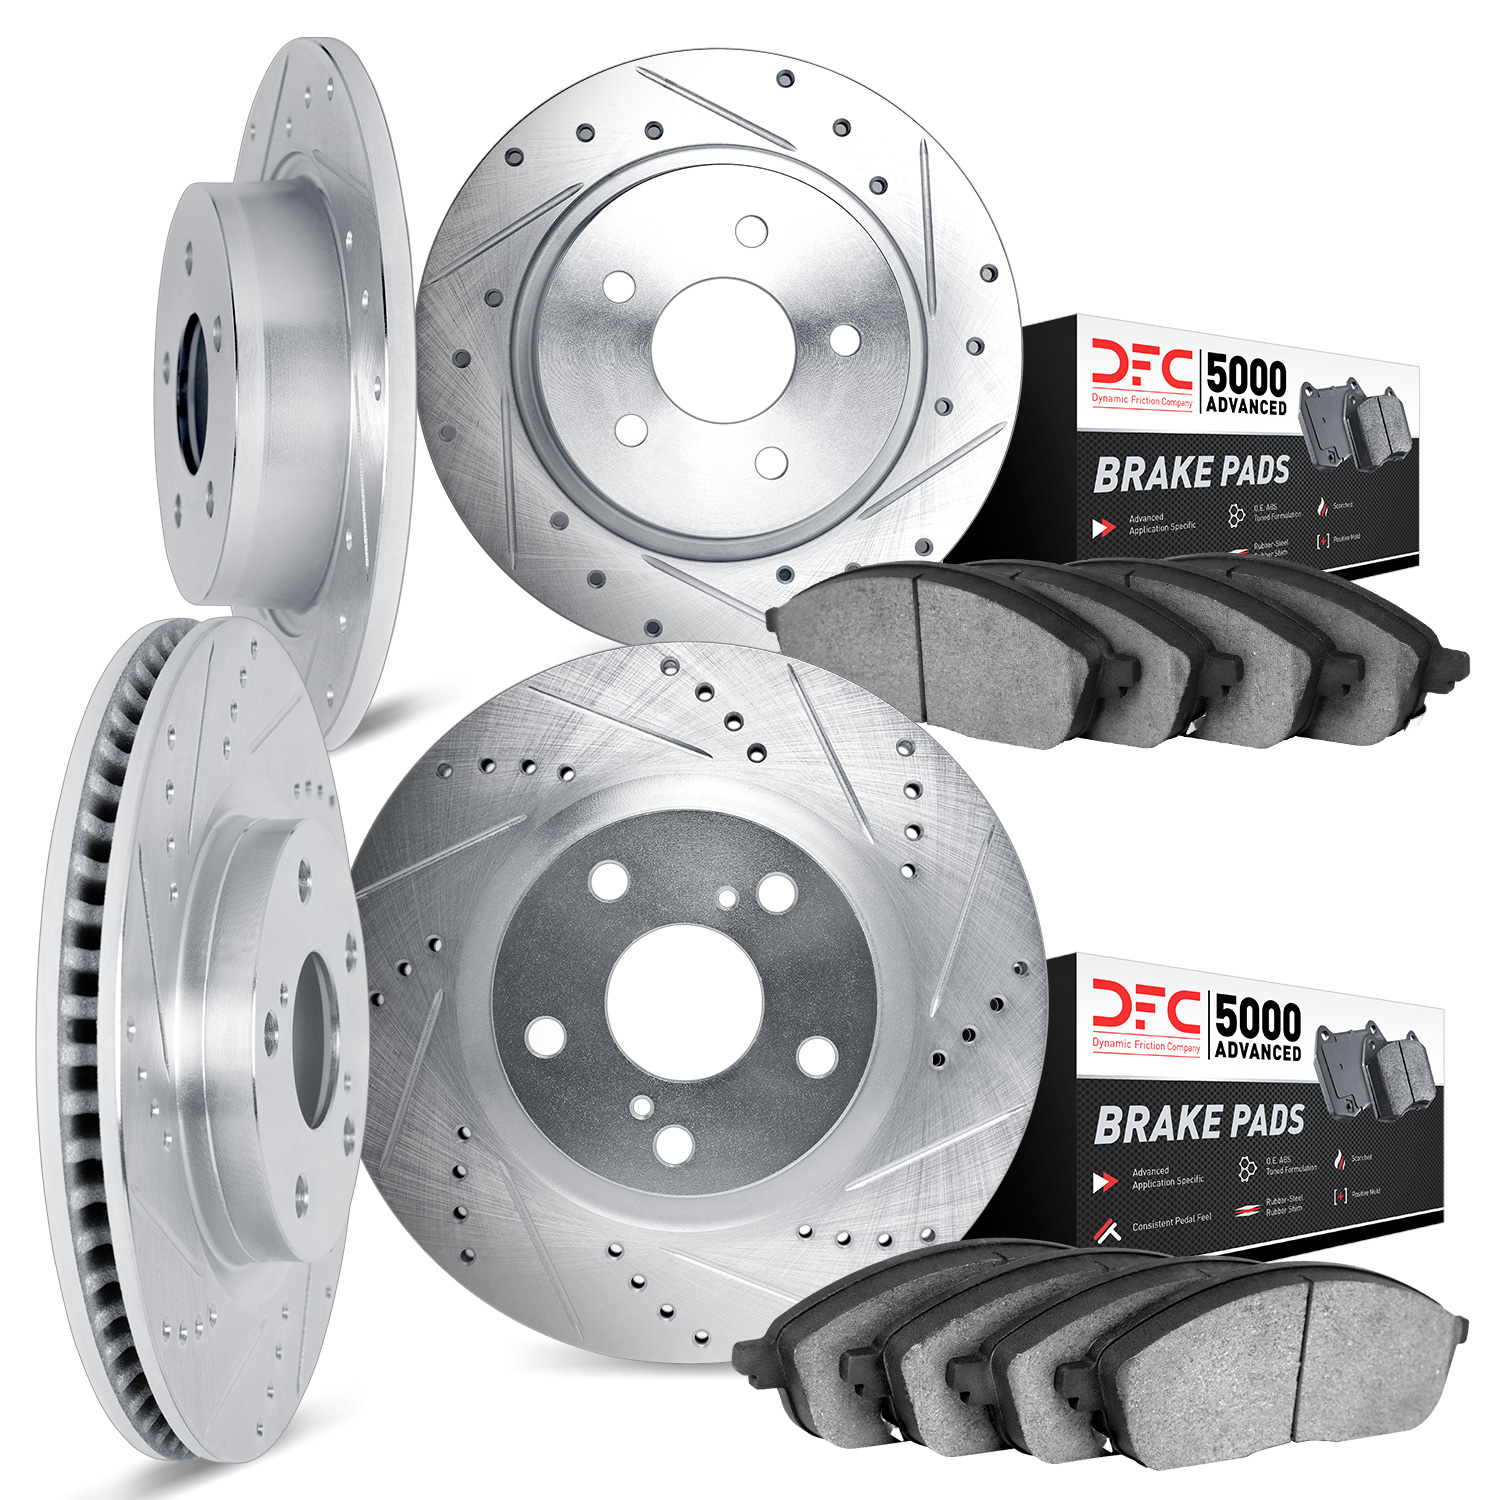 7504-58006 Drilled/Slotted Brake Rotors w/5000 Advanced Brake Pads Kit [Silver], 2015-2020 Acura/Honda, Position: Front and Rear